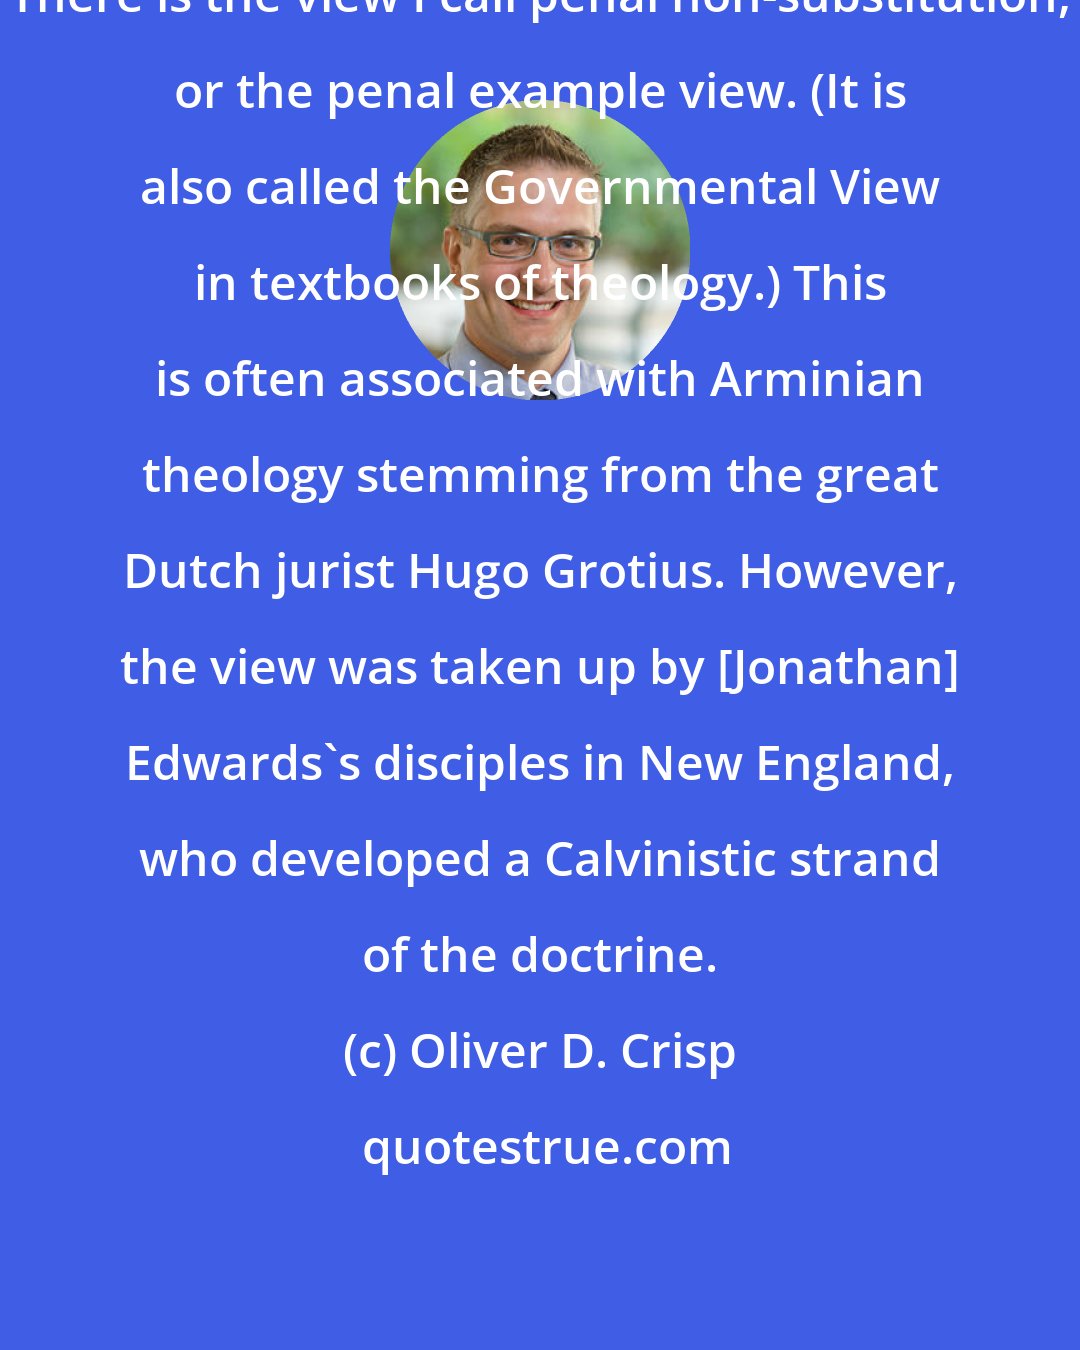 Oliver D. Crisp: There is the view I call penal non-substitution, or the penal example view. (It is also called the Governmental View in textbooks of theology.) This is often associated with Arminian theology stemming from the great Dutch jurist Hugo Grotius. However, the view was taken up by [Jonathan] Edwards's disciples in New England, who developed a Calvinistic strand of the doctrine.